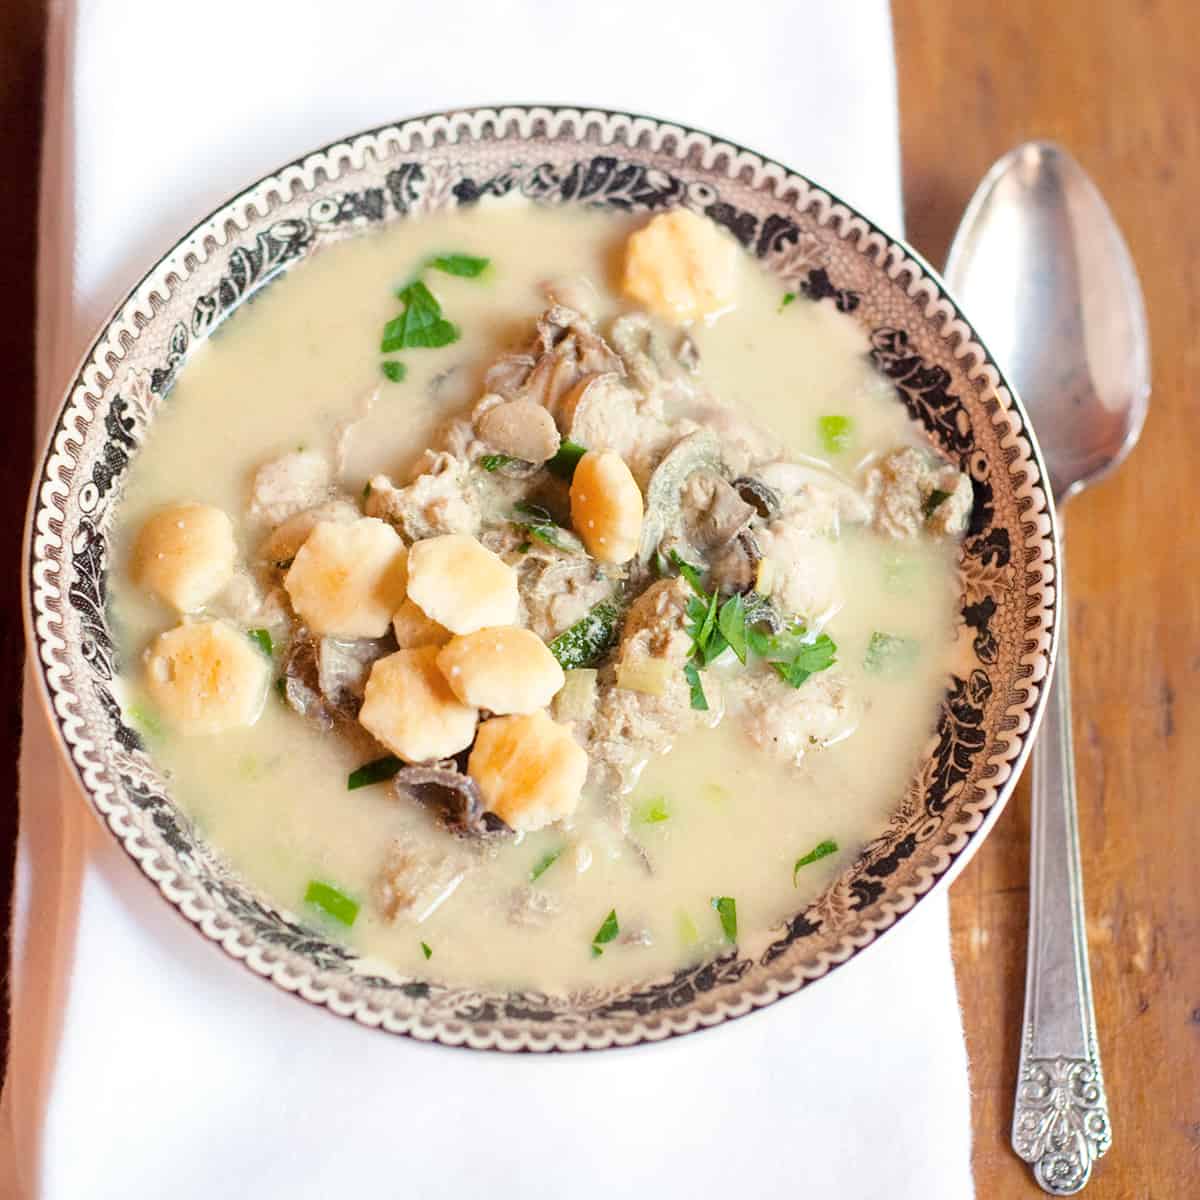 Rich, Creamy Oyster Stew Recipe from Lana's Cooking